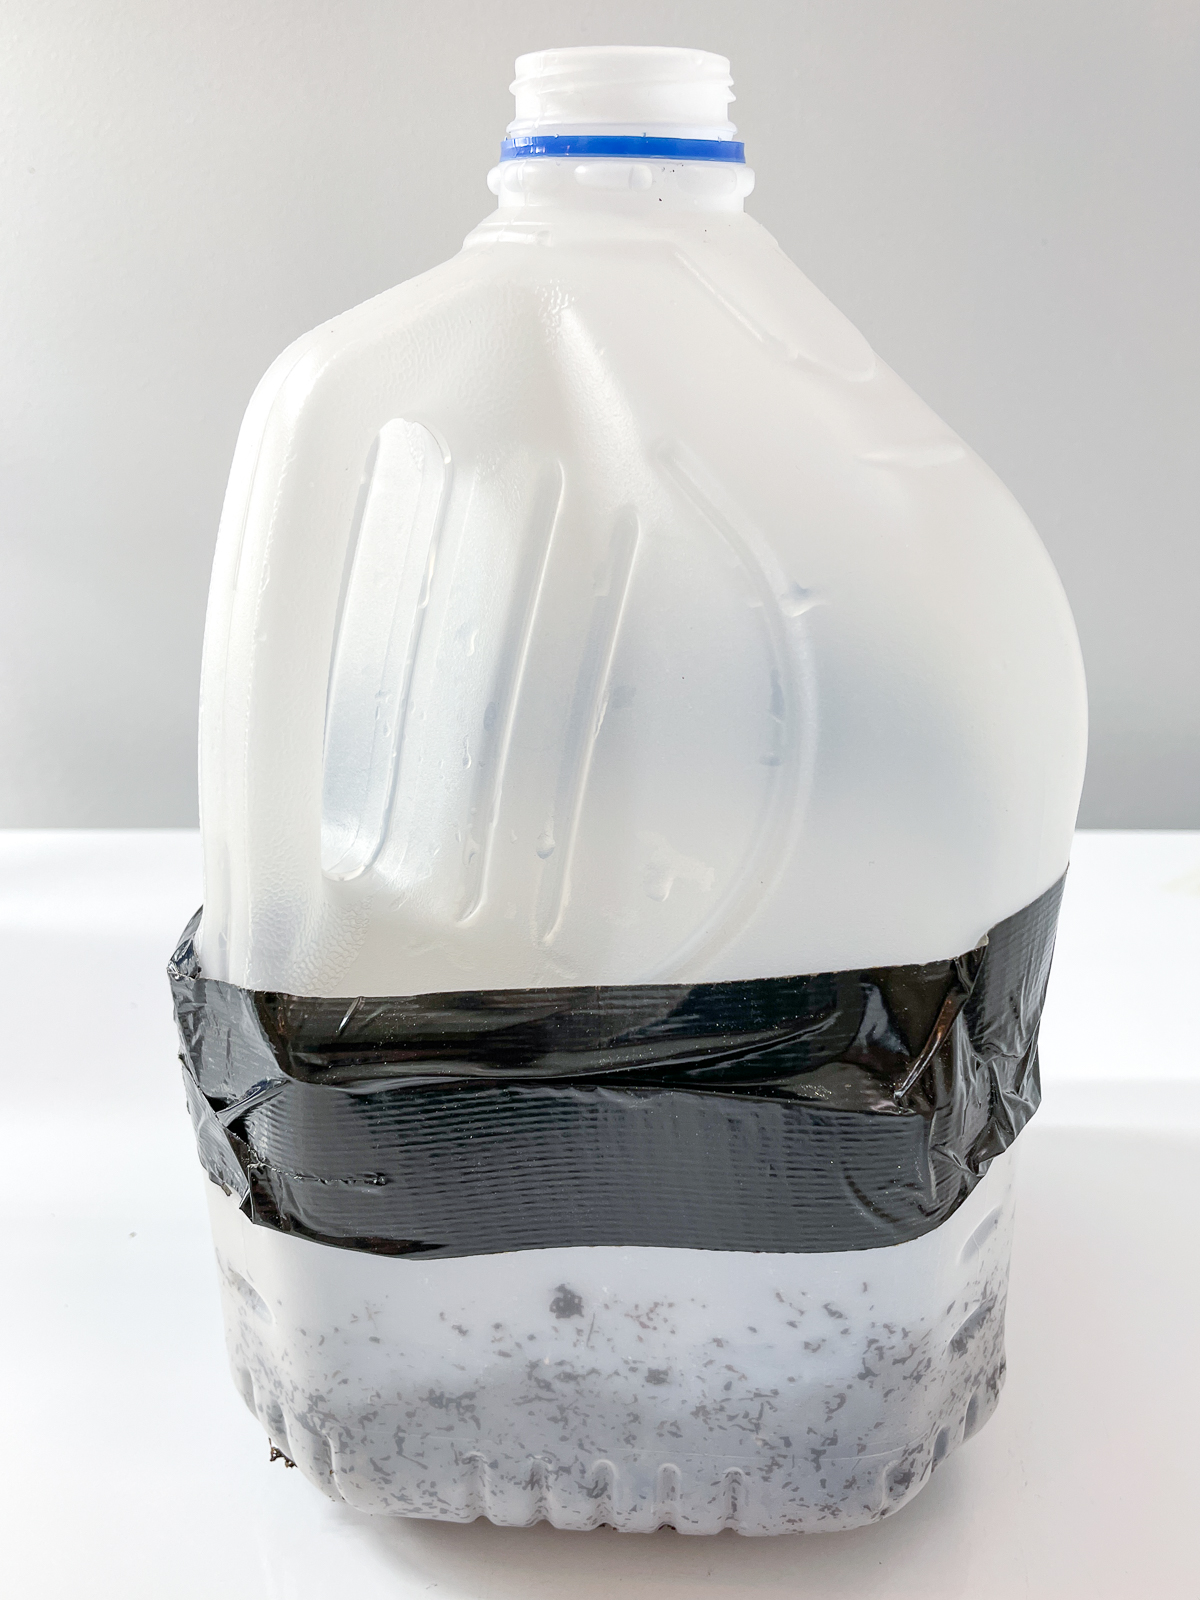 milk jug with seeds sown inside and closed up with black duct tape